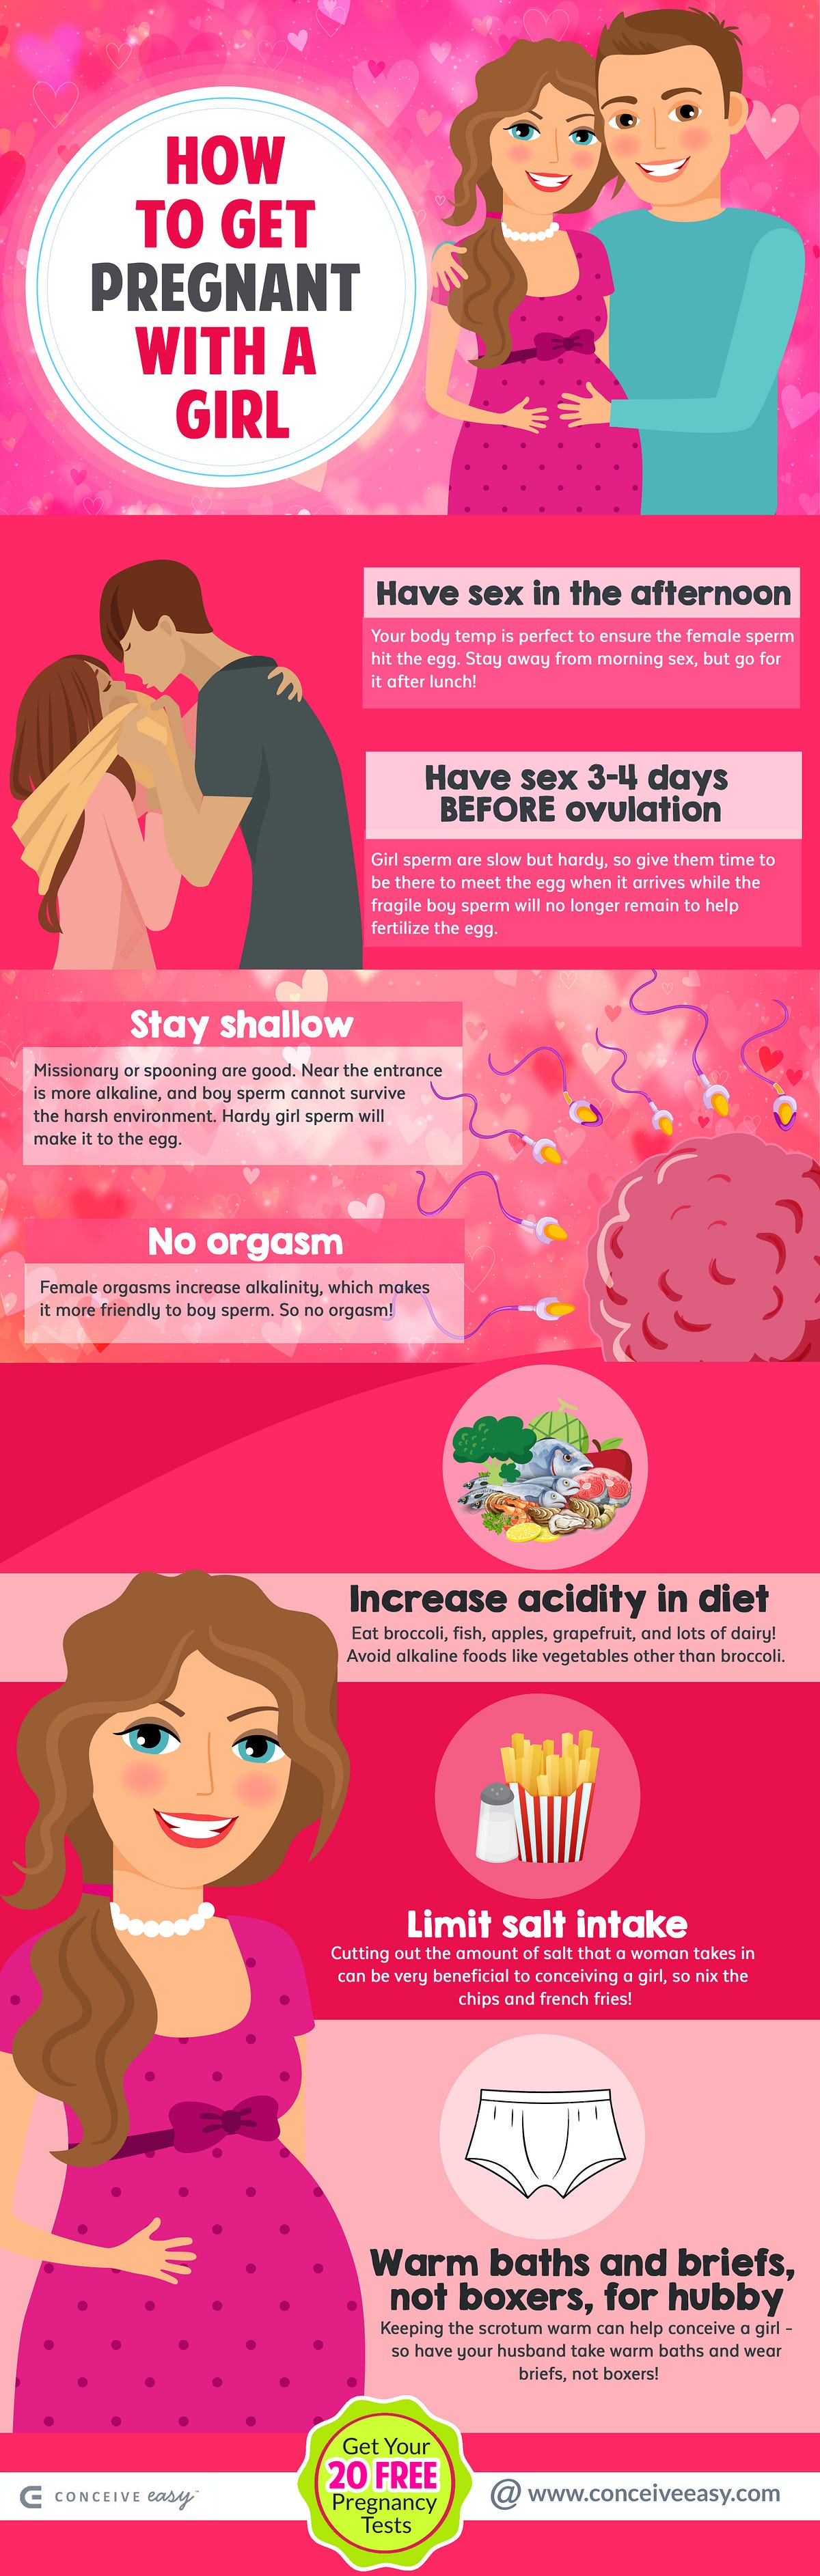 7 Tips How to Get Pregnant with a Girl Infographic by Conceive Easy Medium